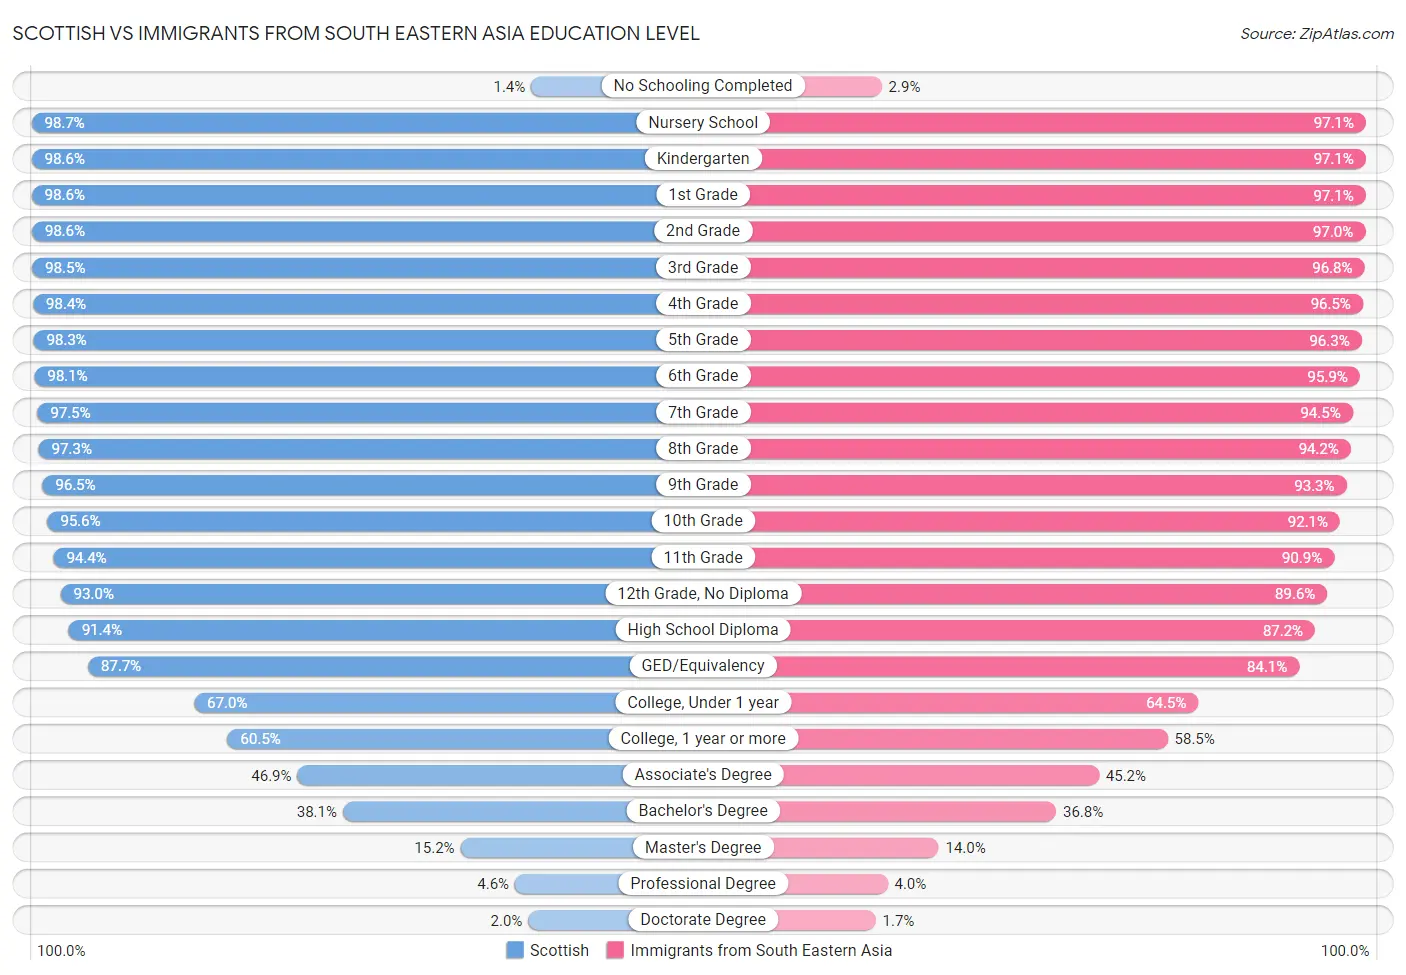 Scottish vs Immigrants from South Eastern Asia Education Level